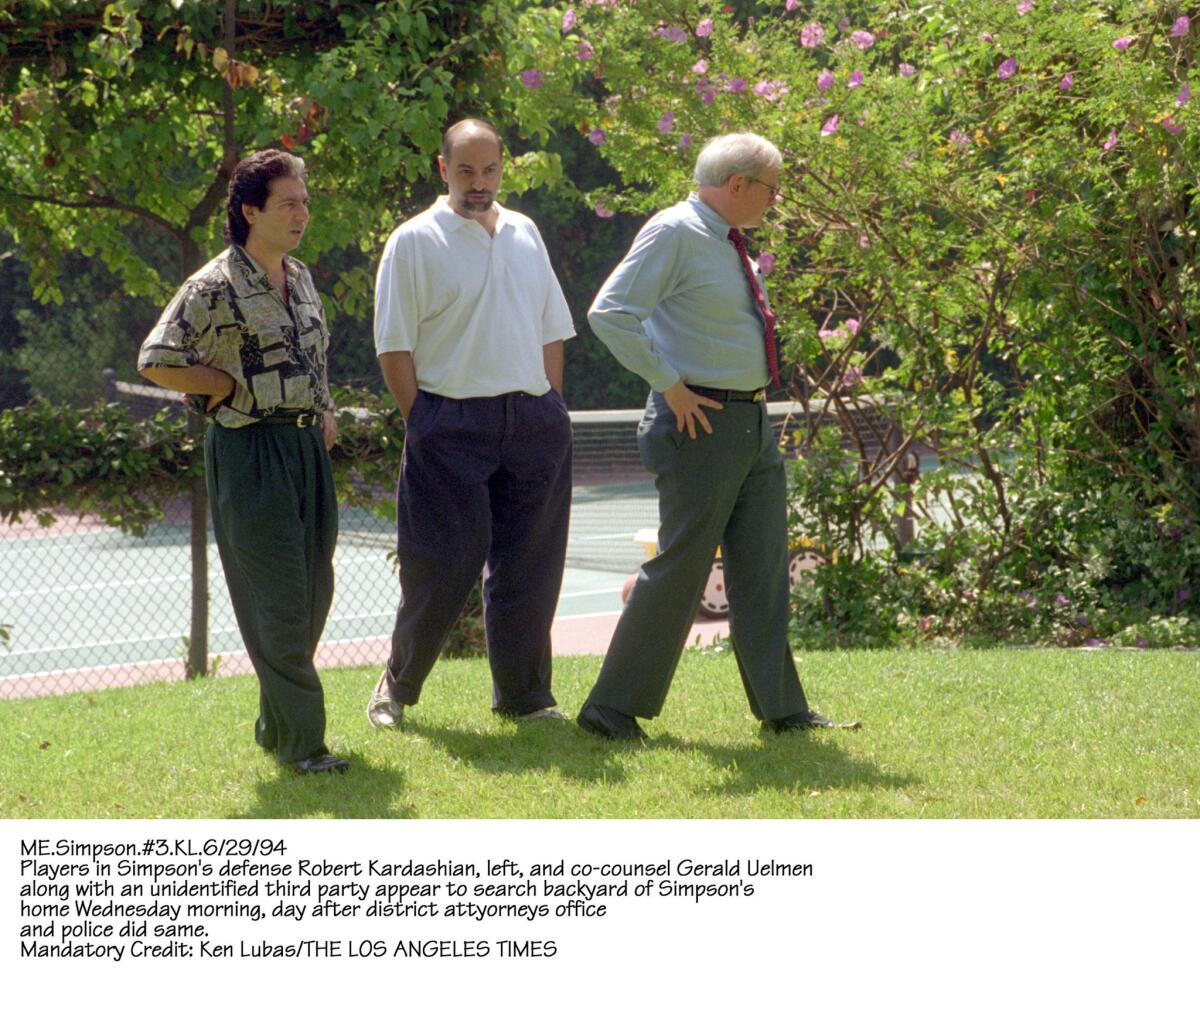 Robert Kardashian left, with attorney Gerald Uelman, right, and an unidentified third party in O.J. Simpson's back yard the day after police and officials from the D.A.'s office searched it.